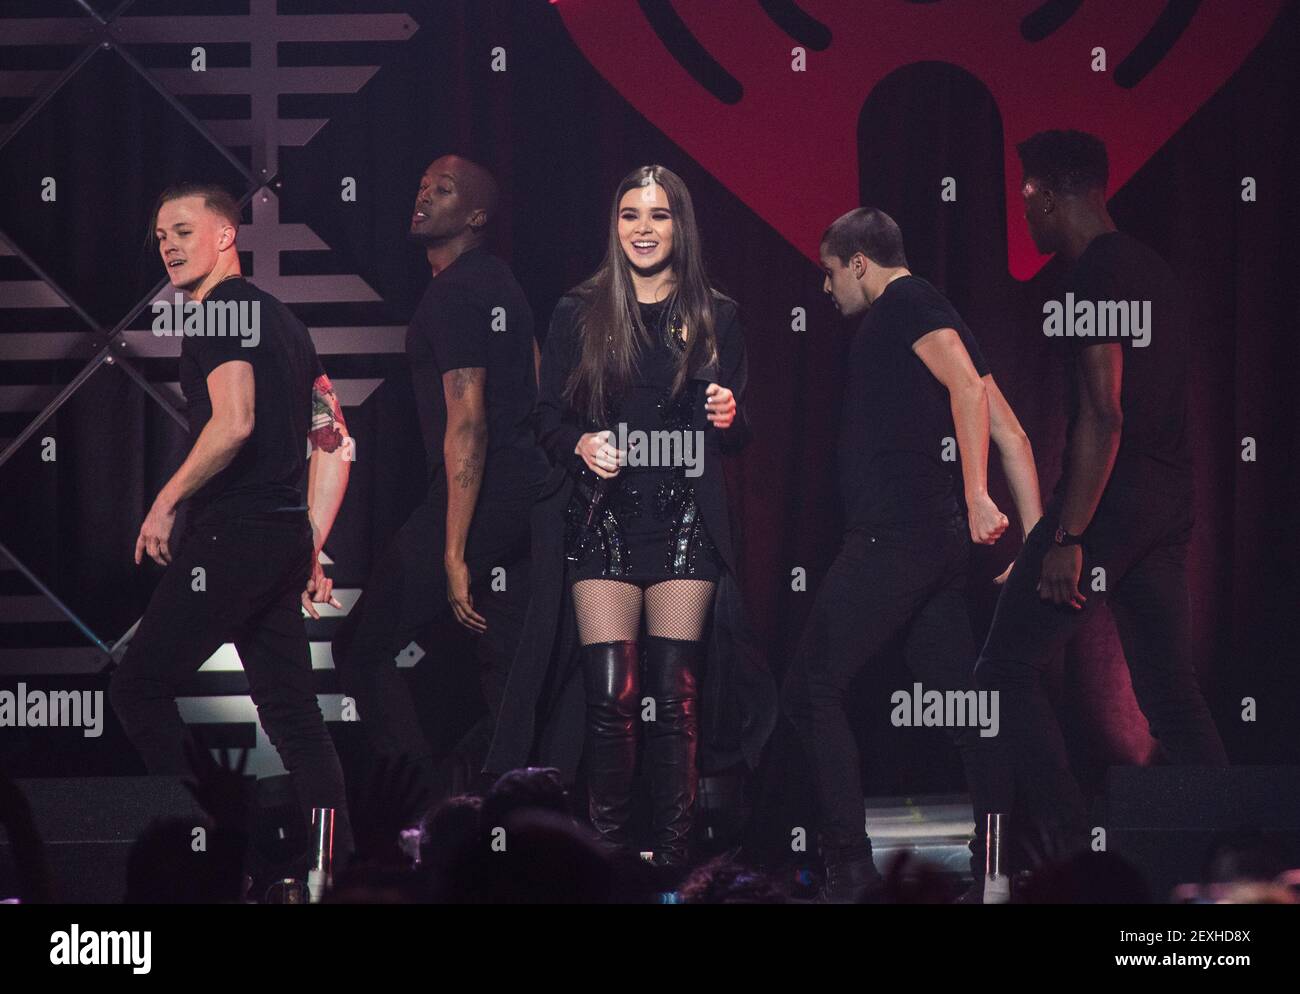 Actress/Singer Hailee Steinfeld performs during the WiLD 94.9 iHeartRadio Jingle Ball at SAP Center on December 1, 2016 in San Jose, California.(Photo by Chris Tuite/ImageSPACE) *** Please Use Credit from Credit Field *** Stock Photo